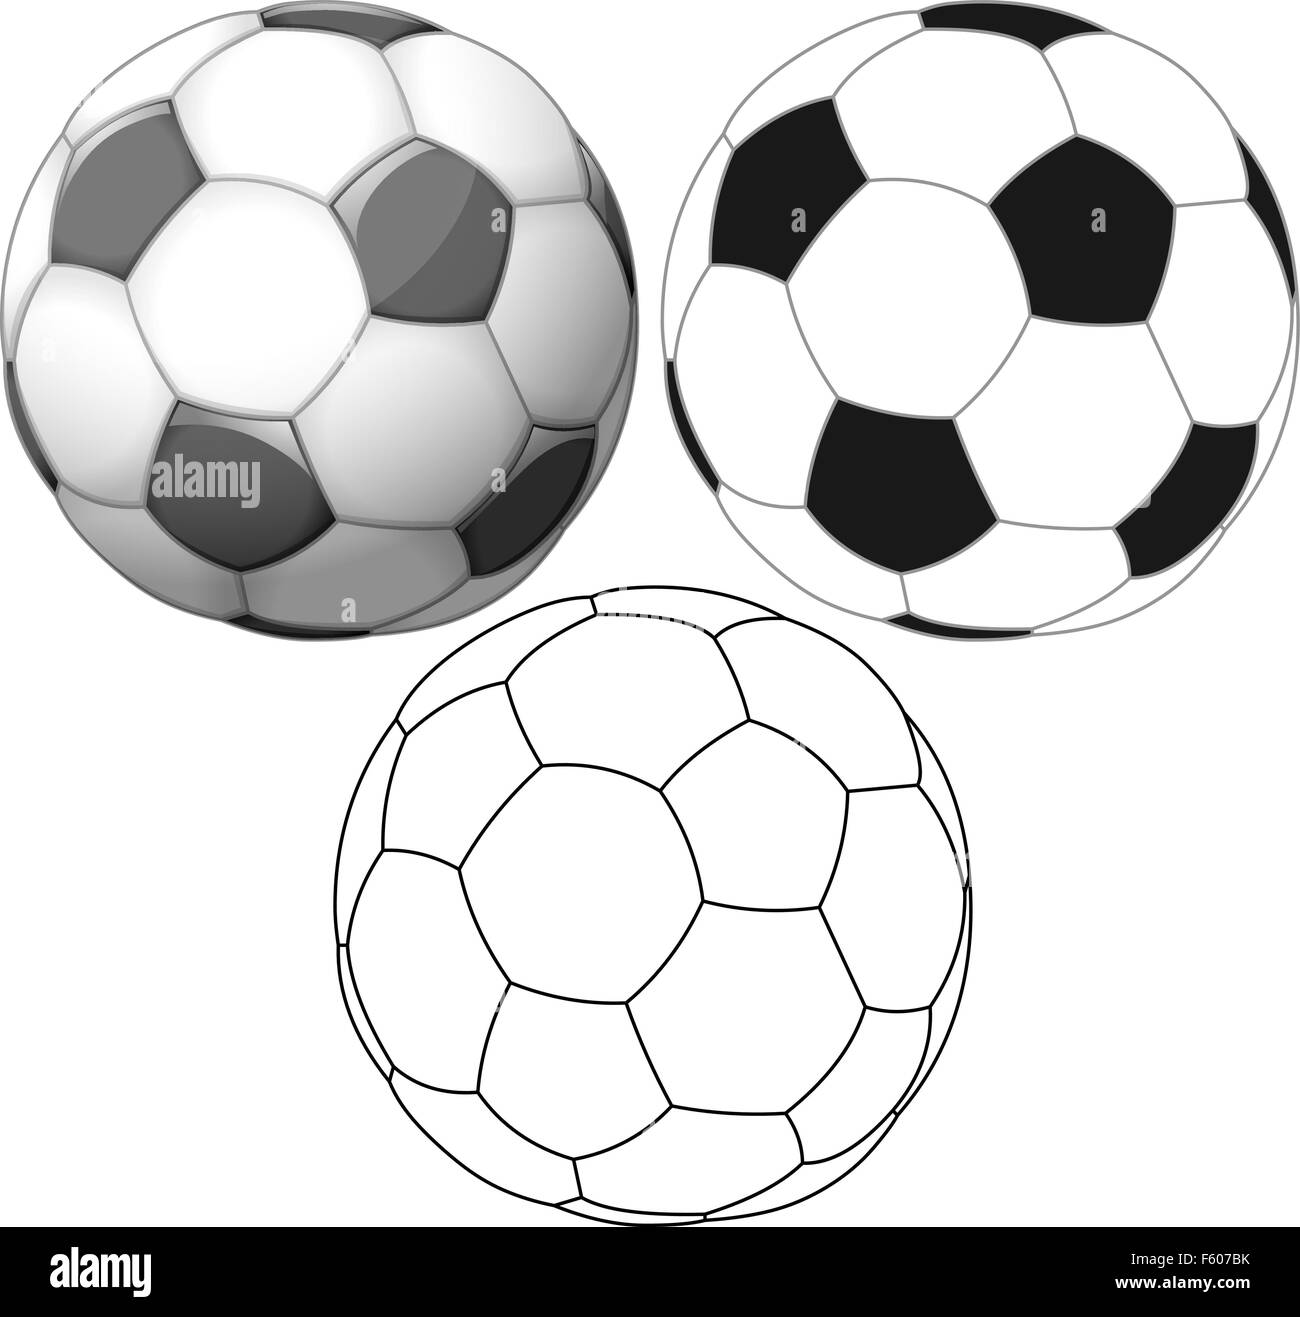 Vector illustration set of soccer ball colored black and white and outline. Stock Vector